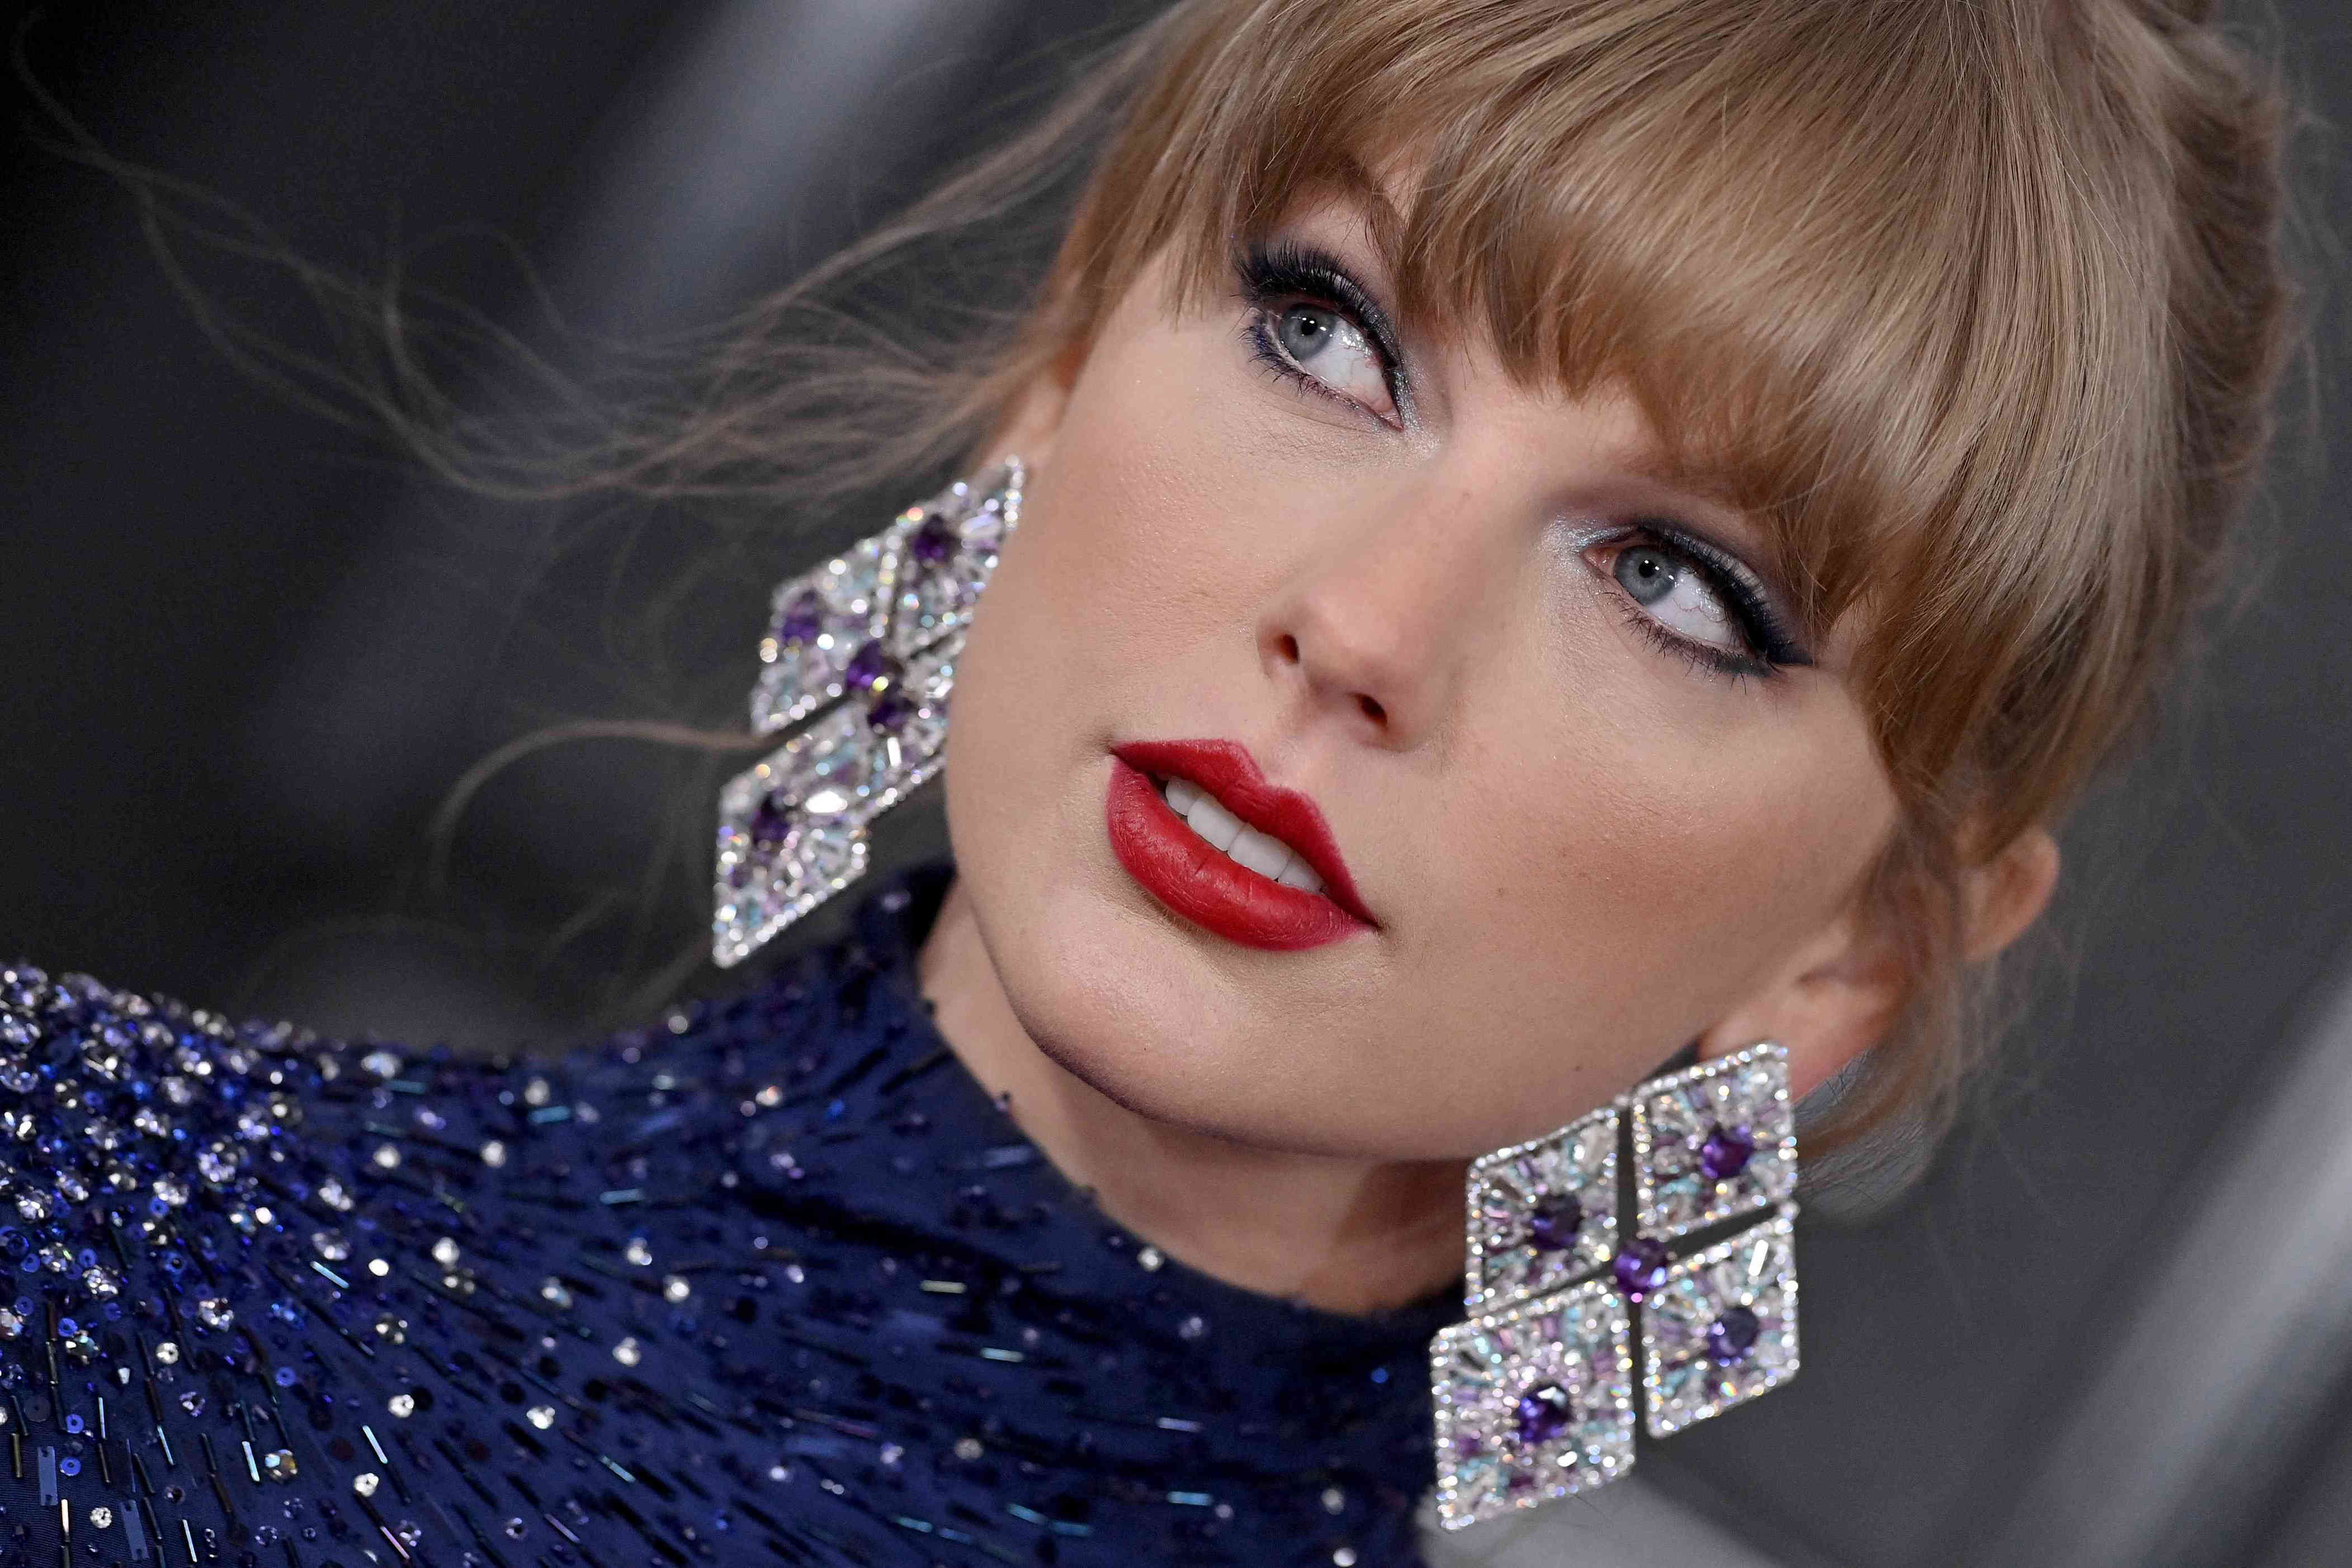 Taylor Swift Is a Billionaire—Swift's Net Worth and Business Empire